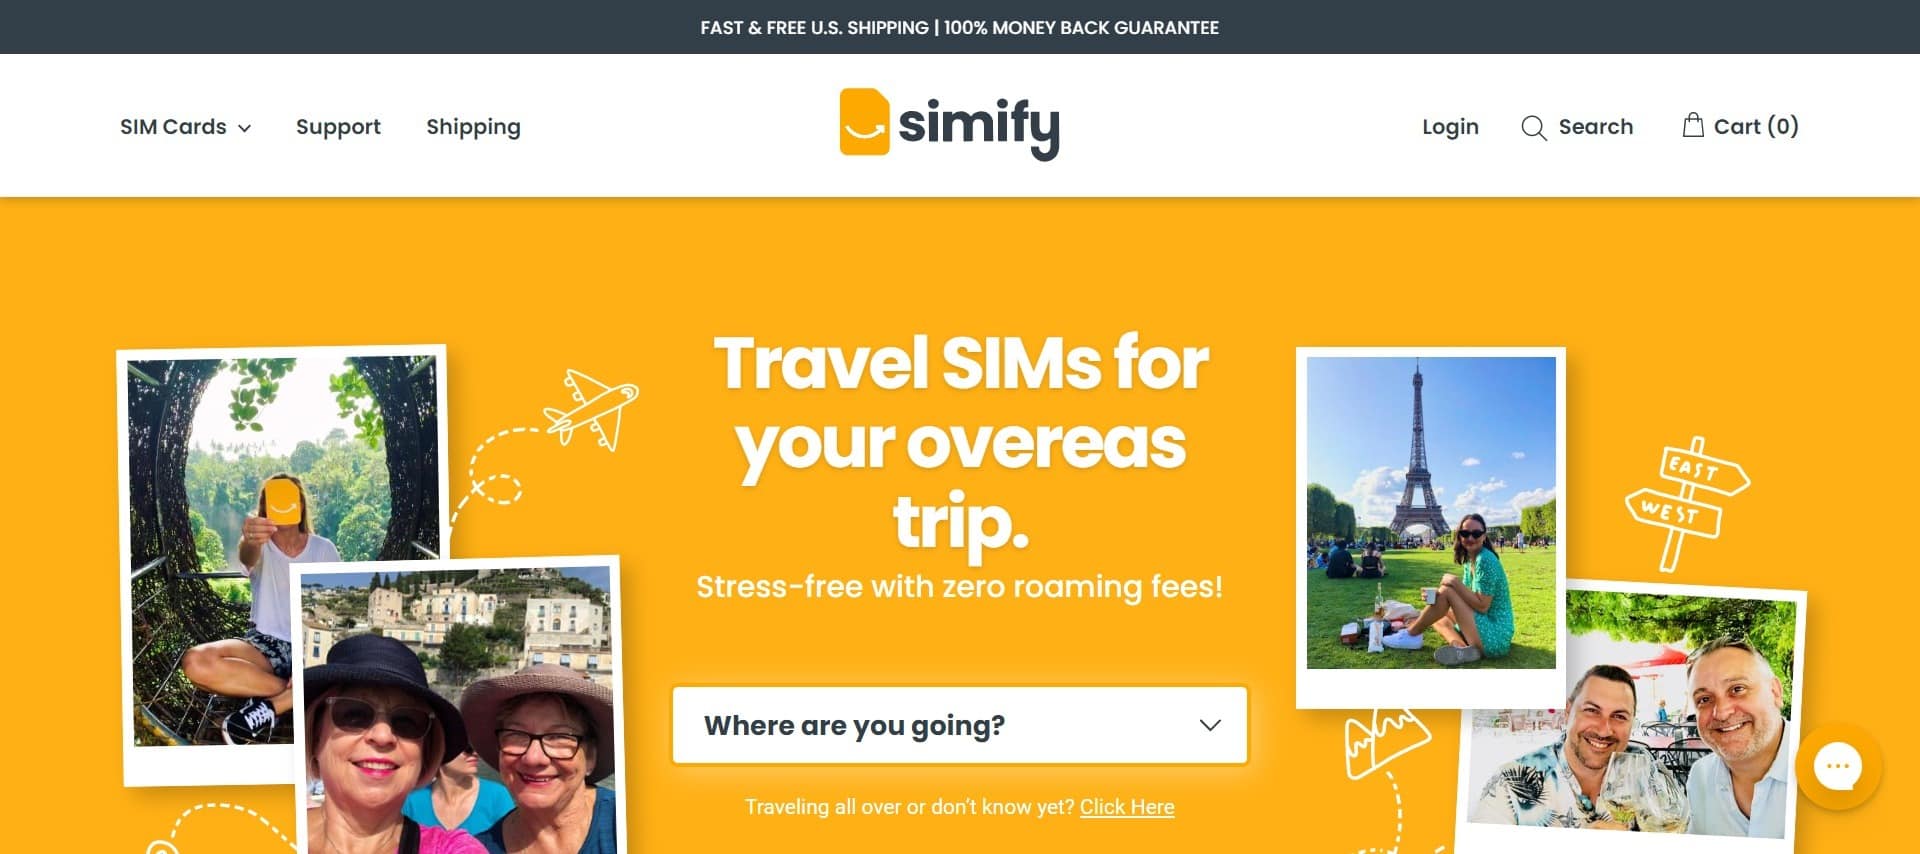 Simify offer